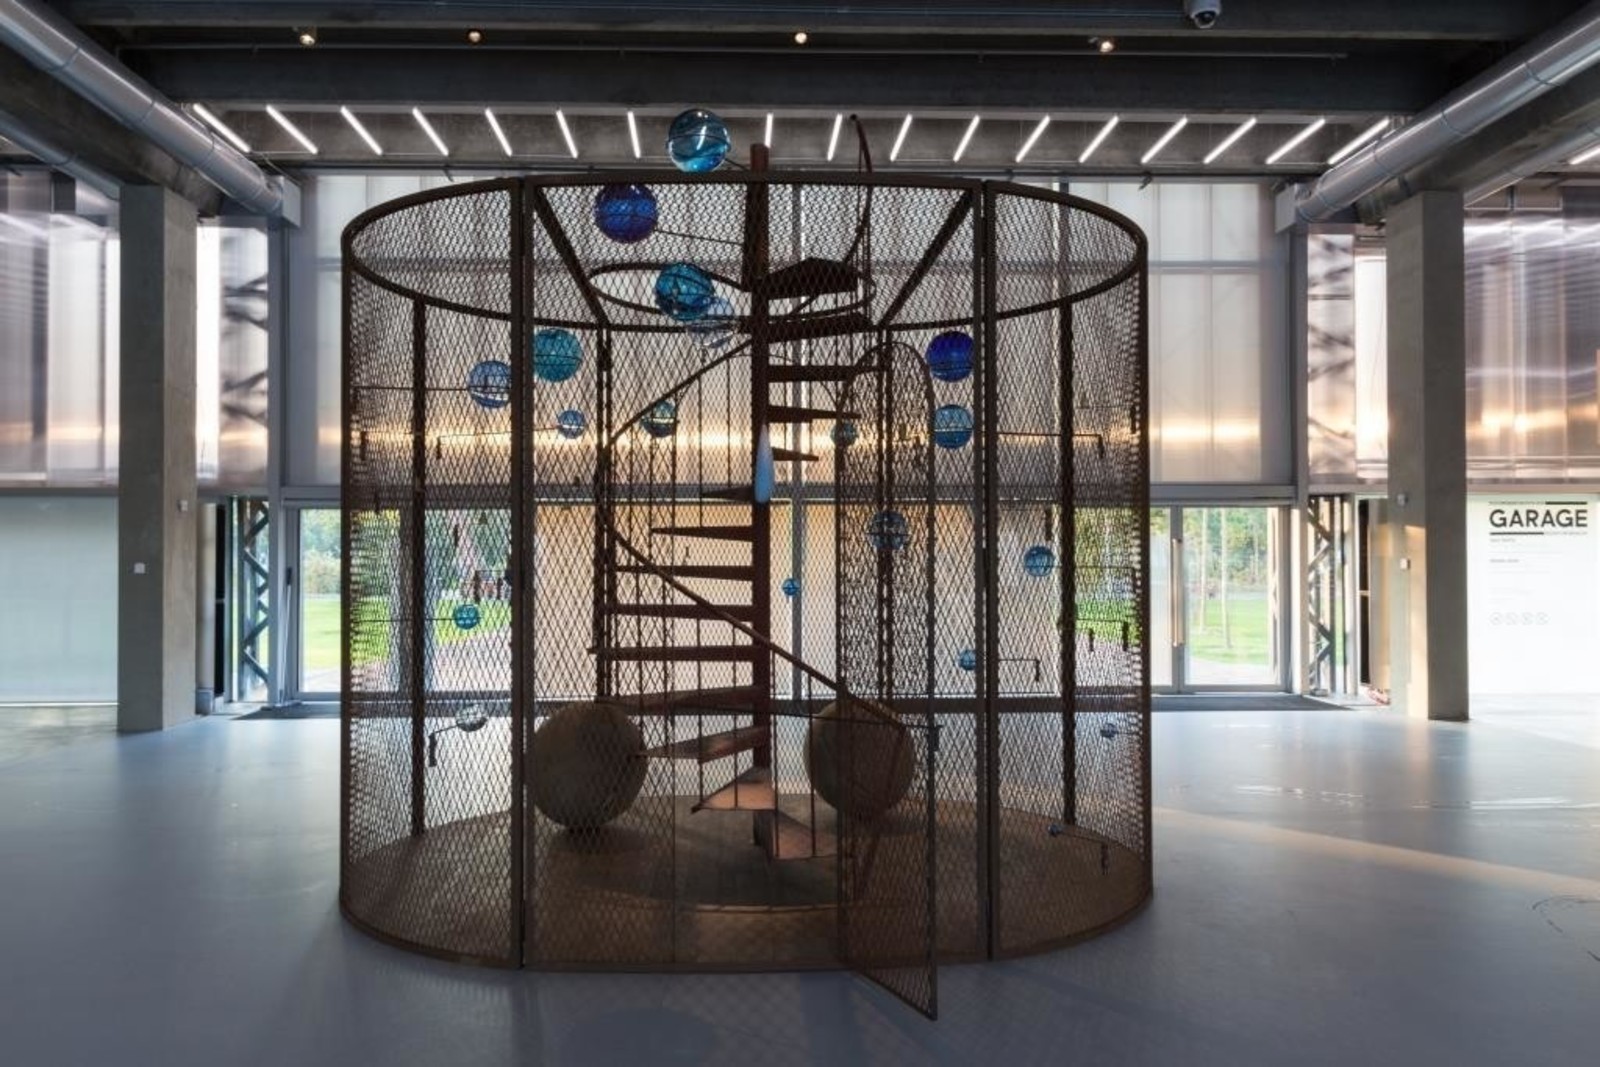 Louise Bourgeois. Cell (The Last Climb), 2008. Steel, glass, rubber, thread and wood 384.8 x 400.1 x 299.7 cm. Collection National Gallery of Canada, Ottawa &copy; Garage Museum of Contemporary Art